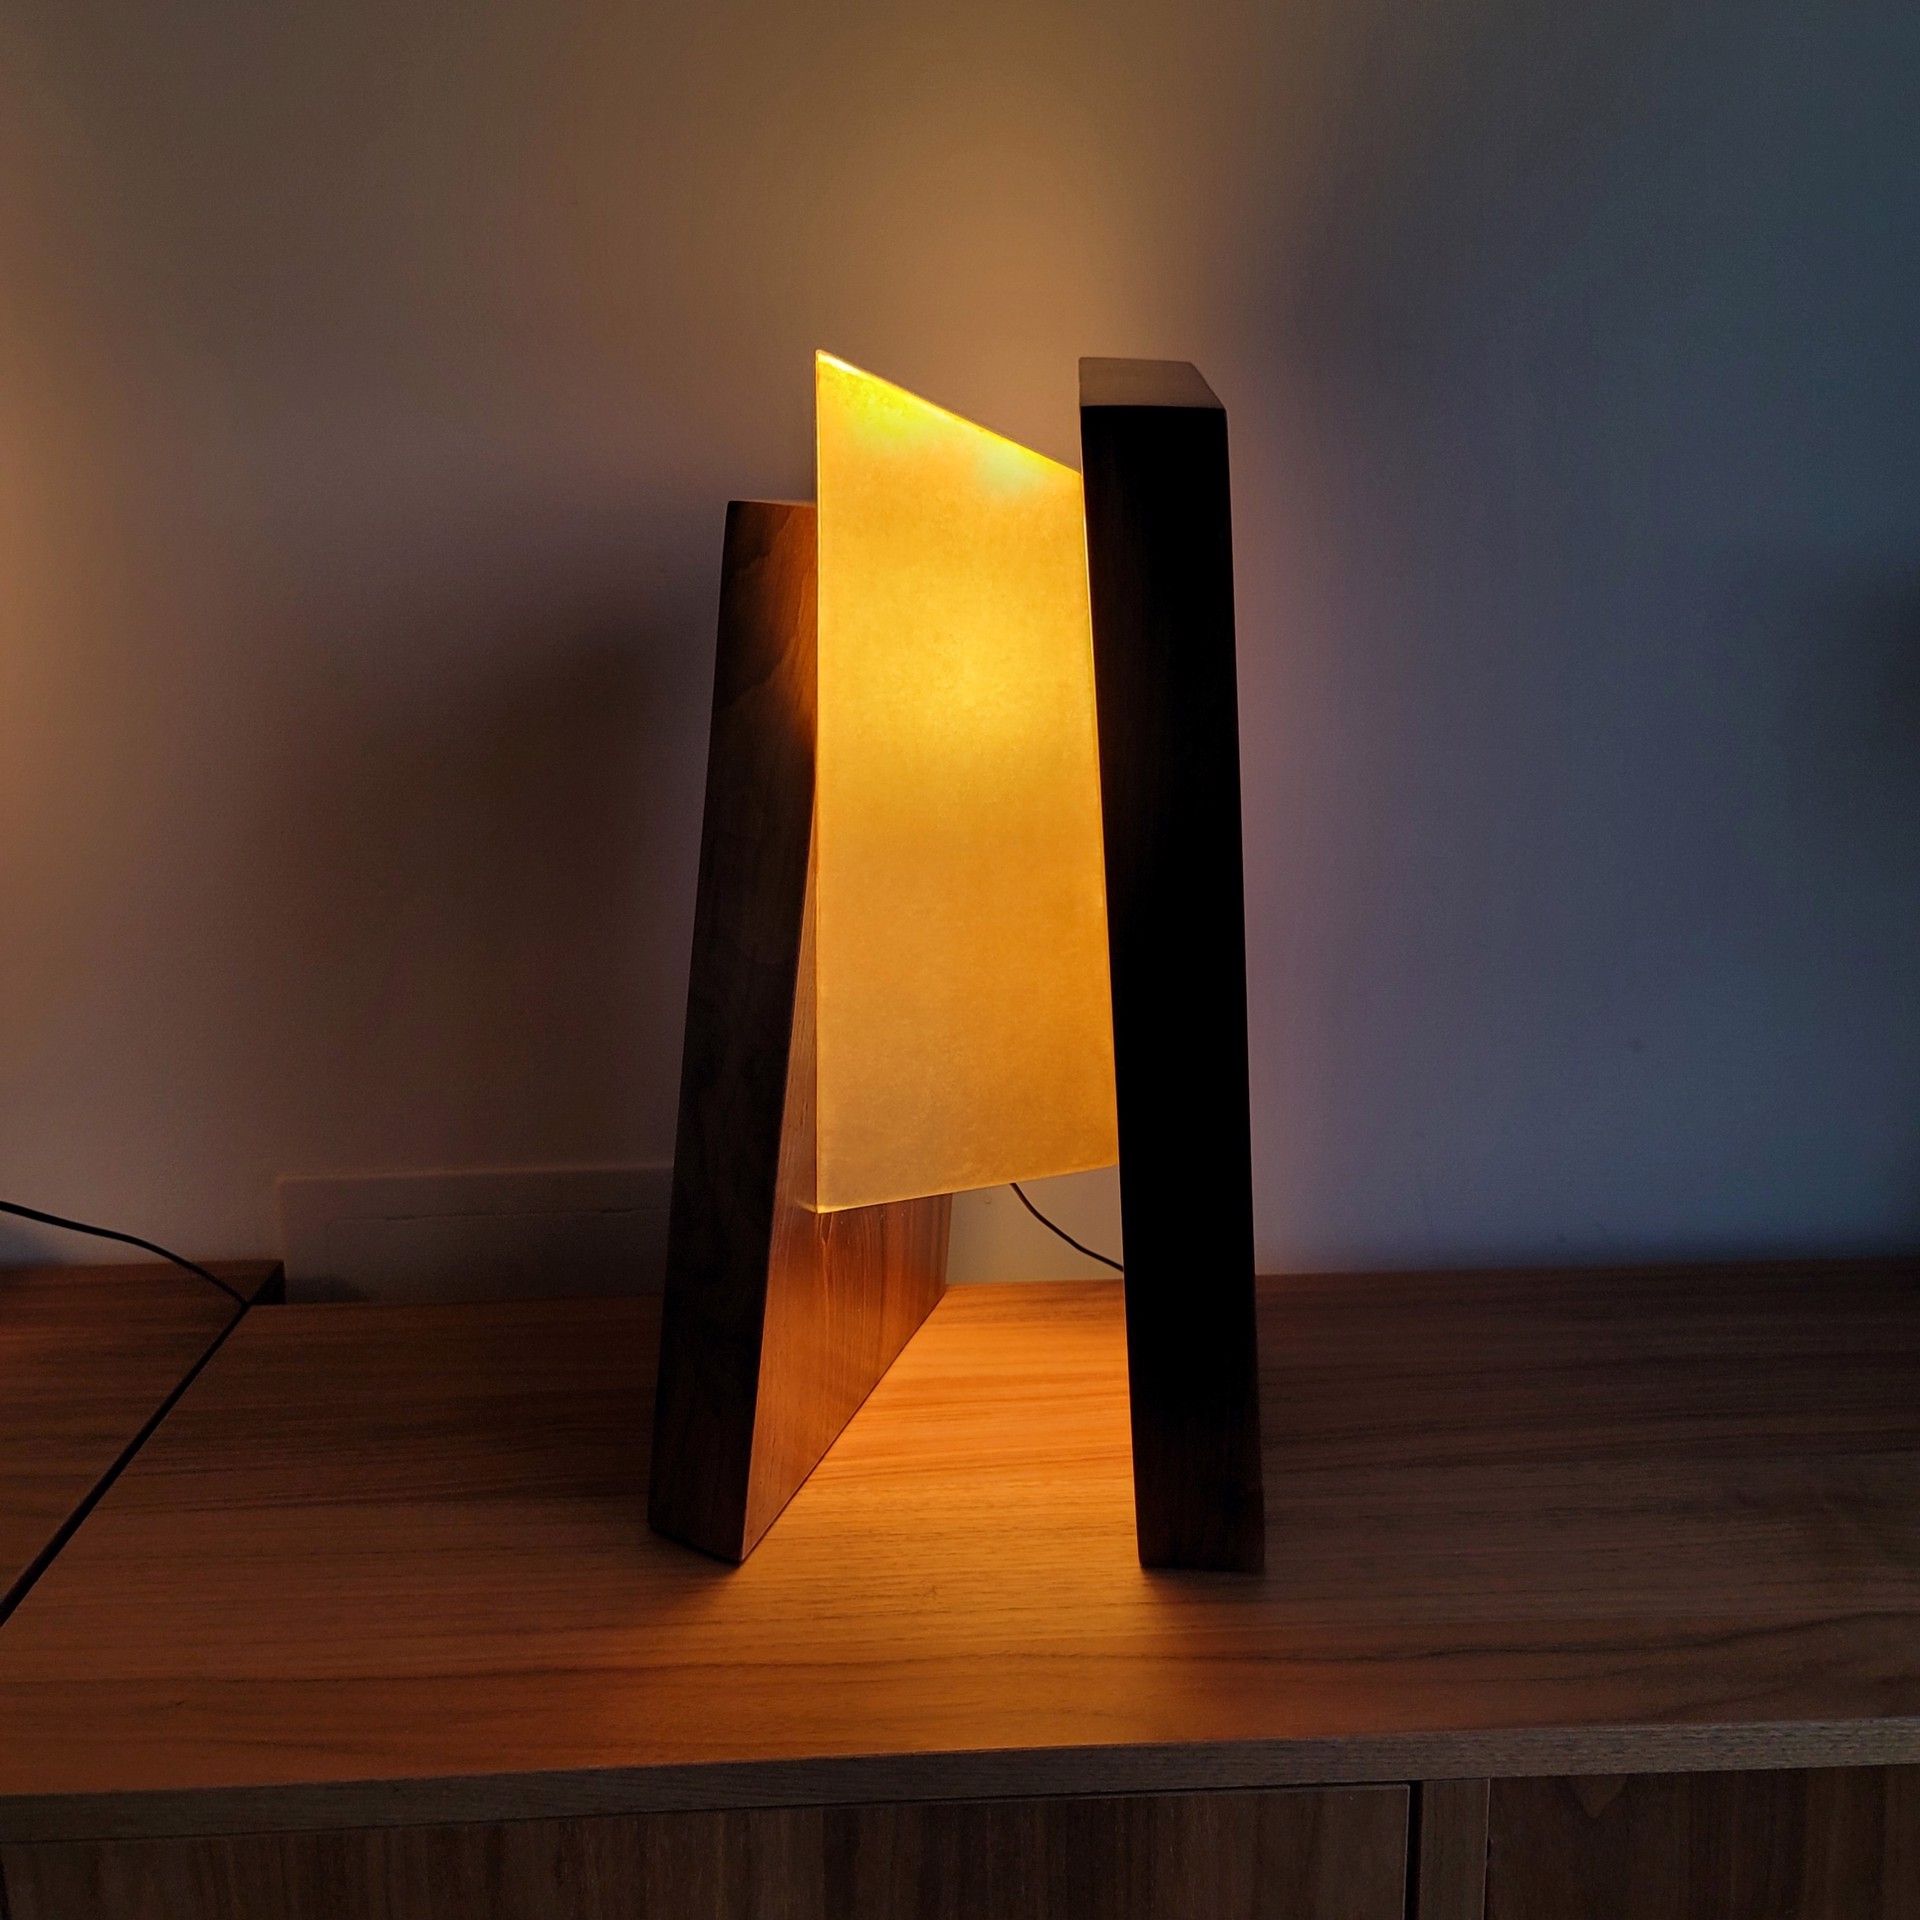 Summit Lamp by James Violette